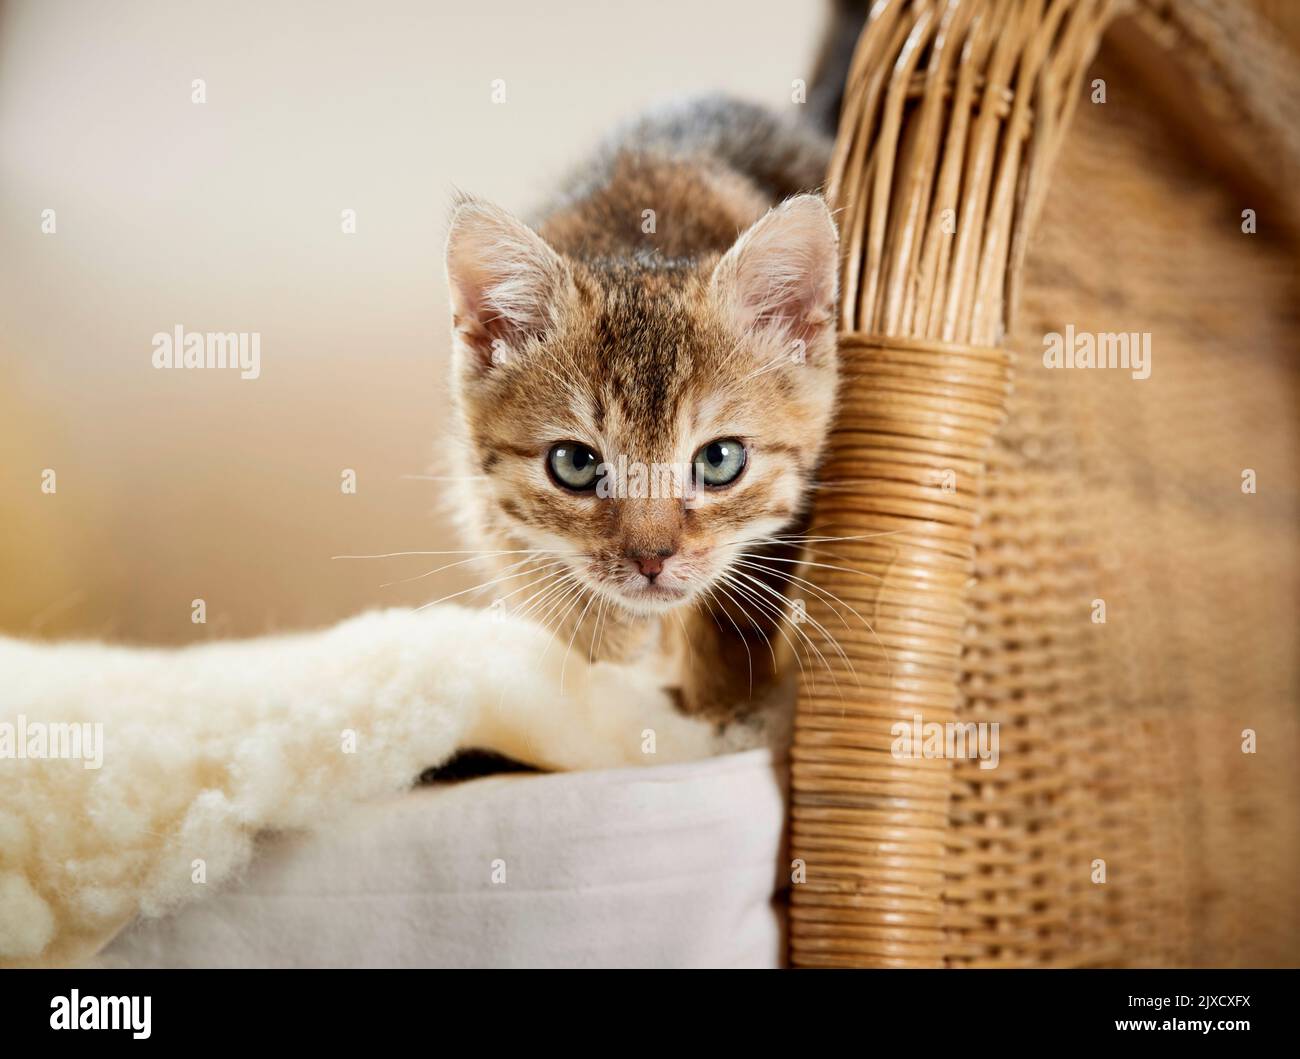 Domestic cat. Domestic cat. A tabby kitten on a wicker chair with lambskin. Germany Stock Photo